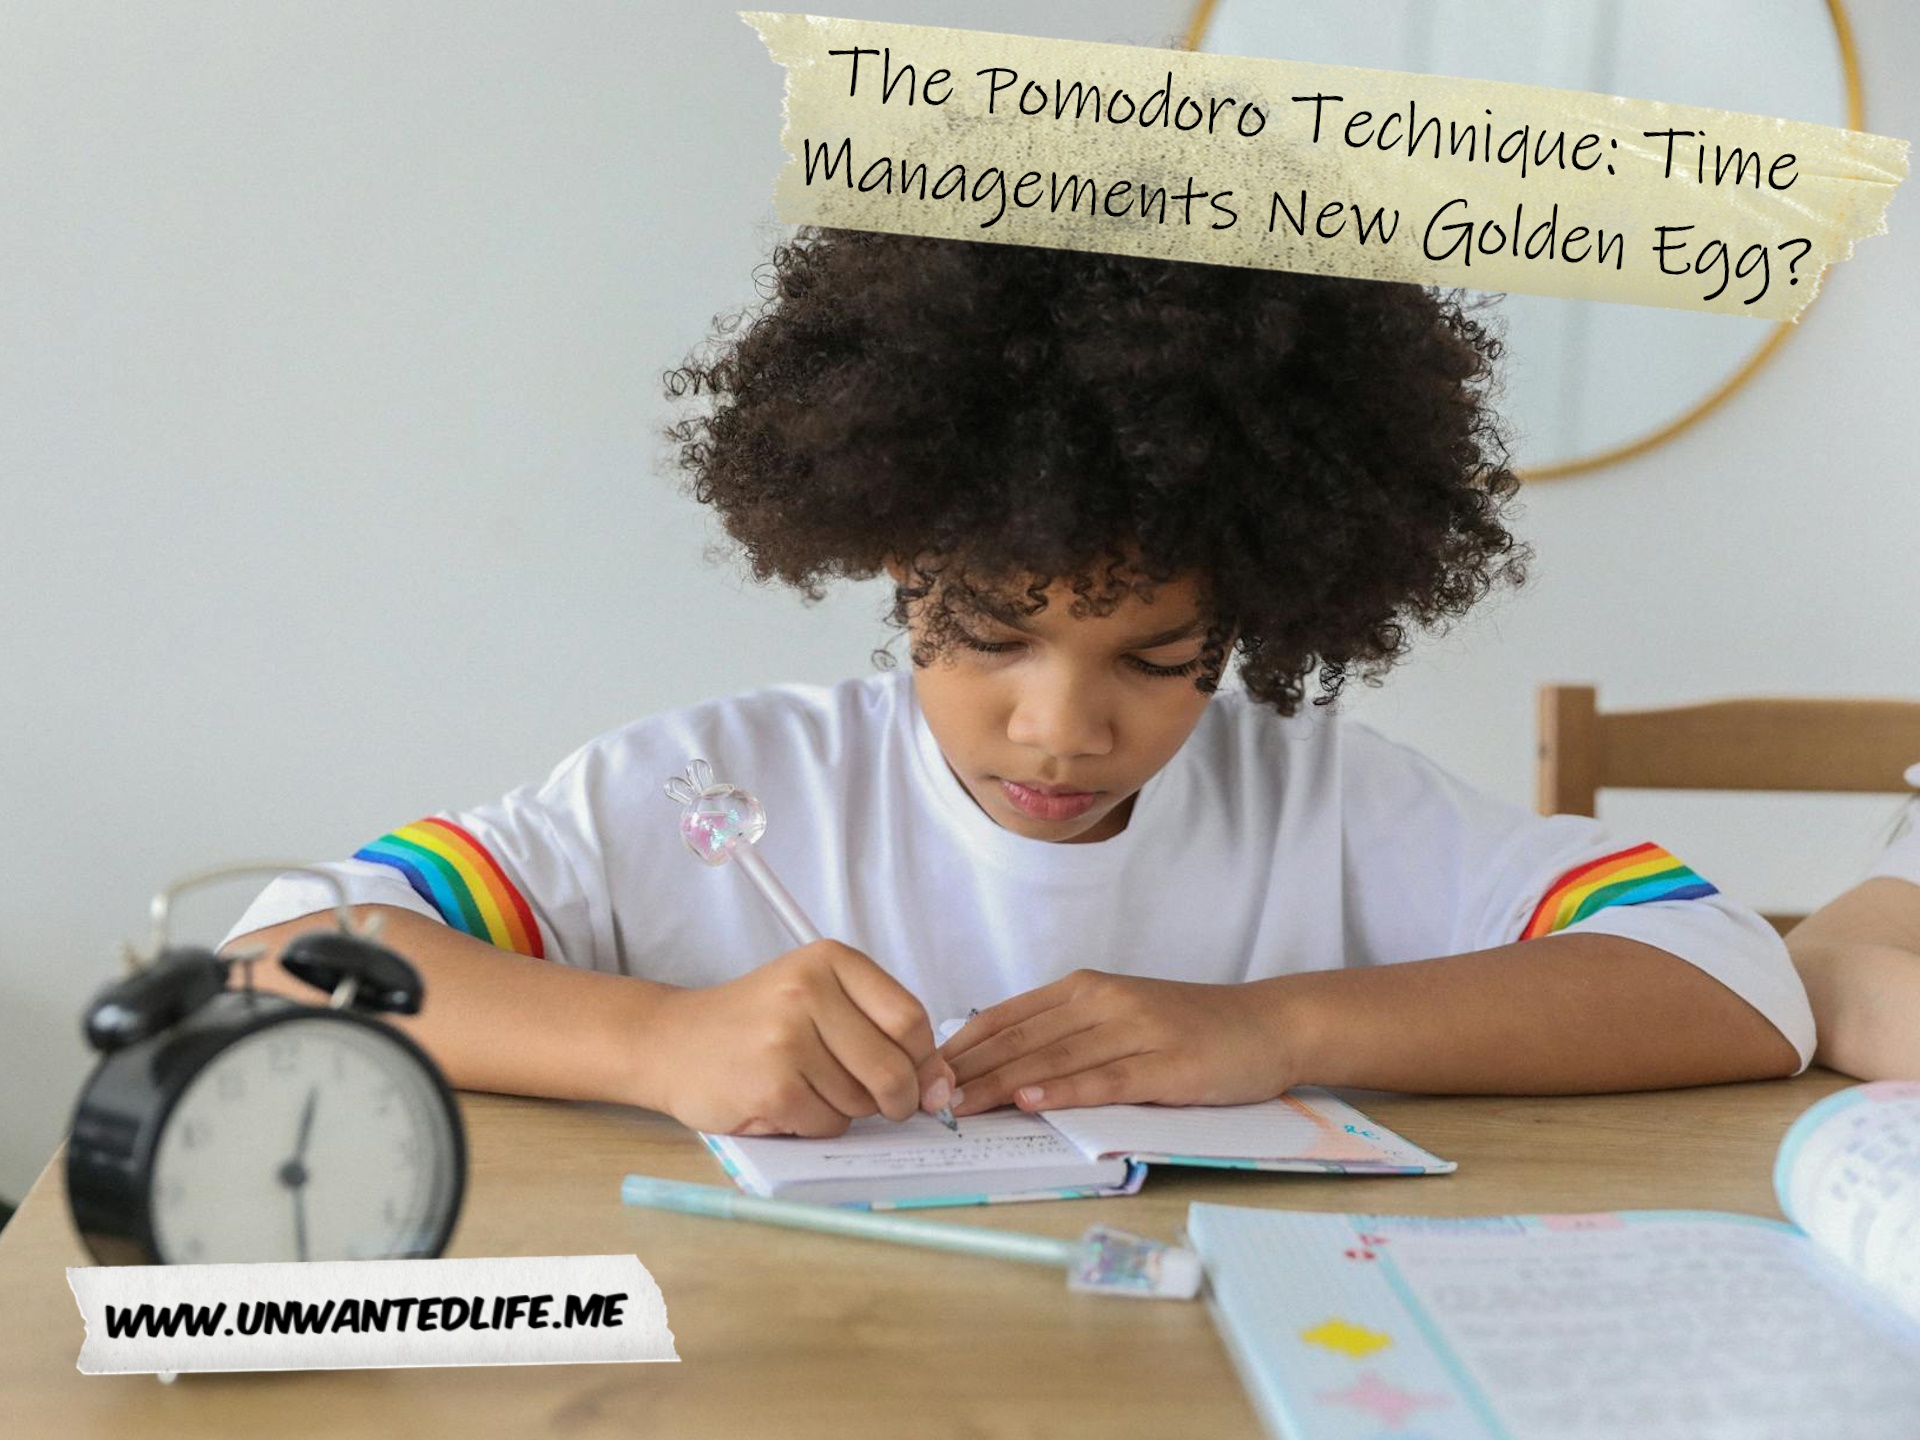 A photo of a Black child working with a clock in the foreground to represent the topic of the article - The Pomodoro Technique: Time Managements New Golden Egg?